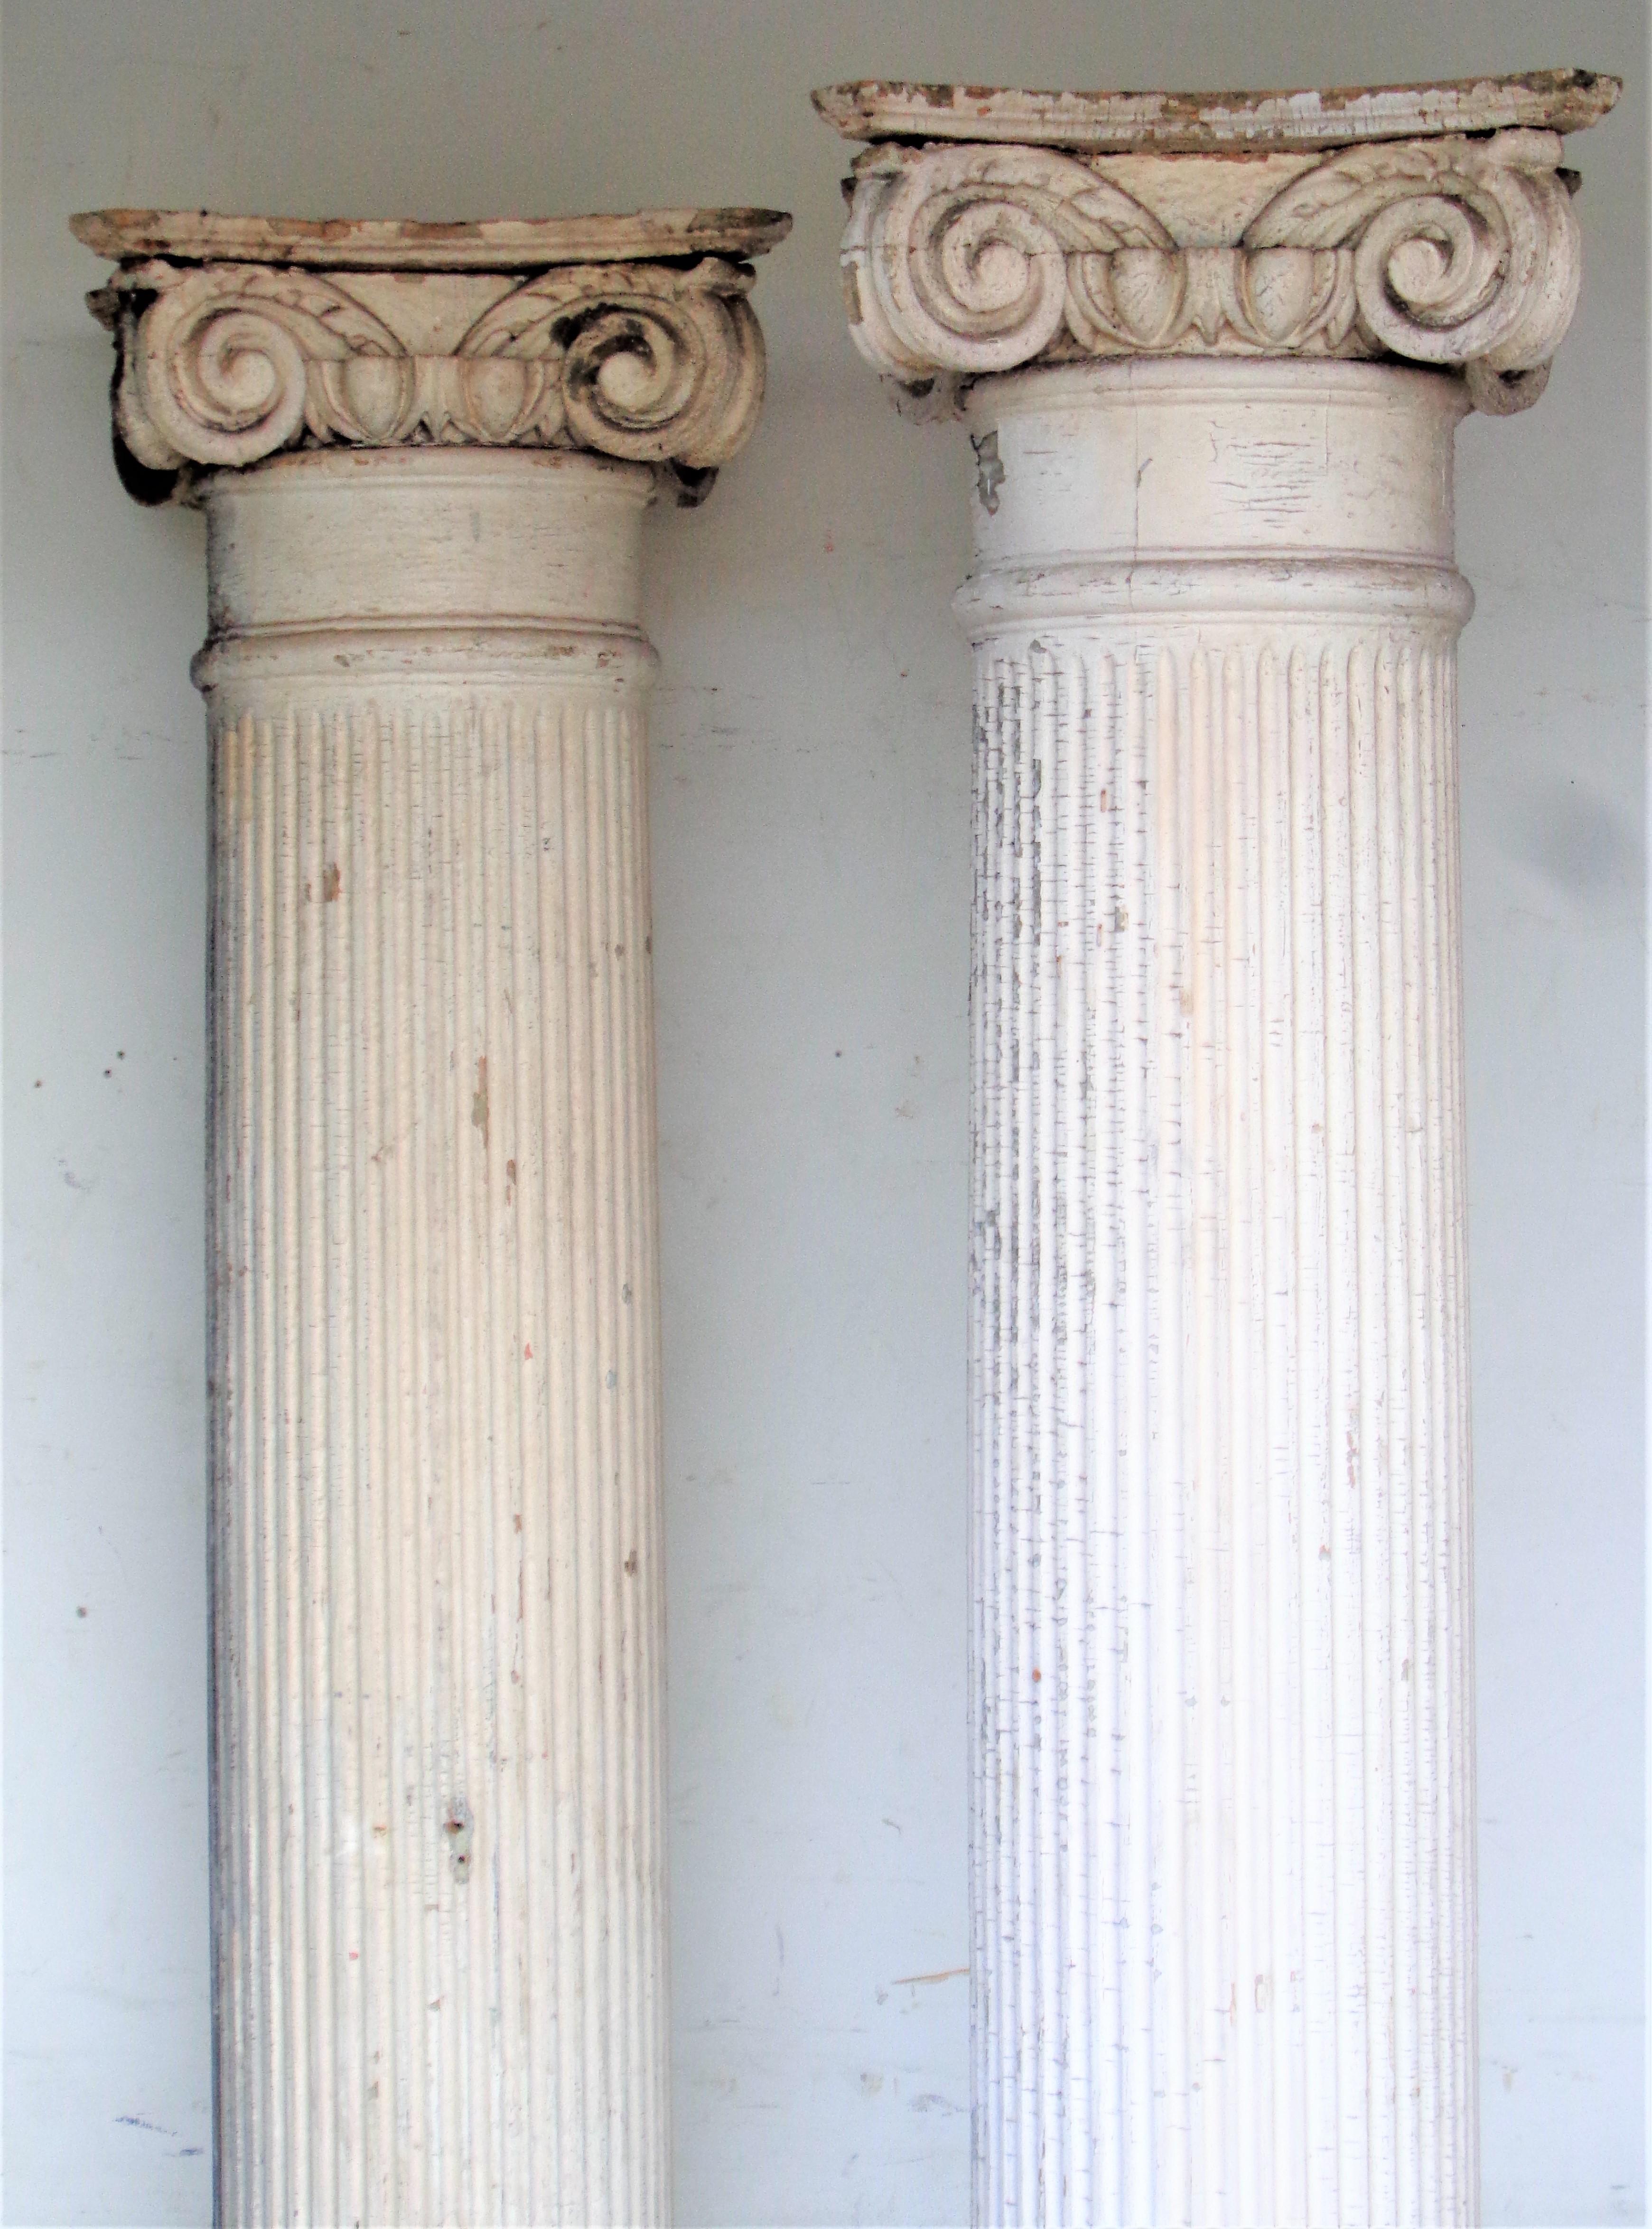 19th Century 19th C. American Architectural Fluted Columns w/ Ionic Capitals